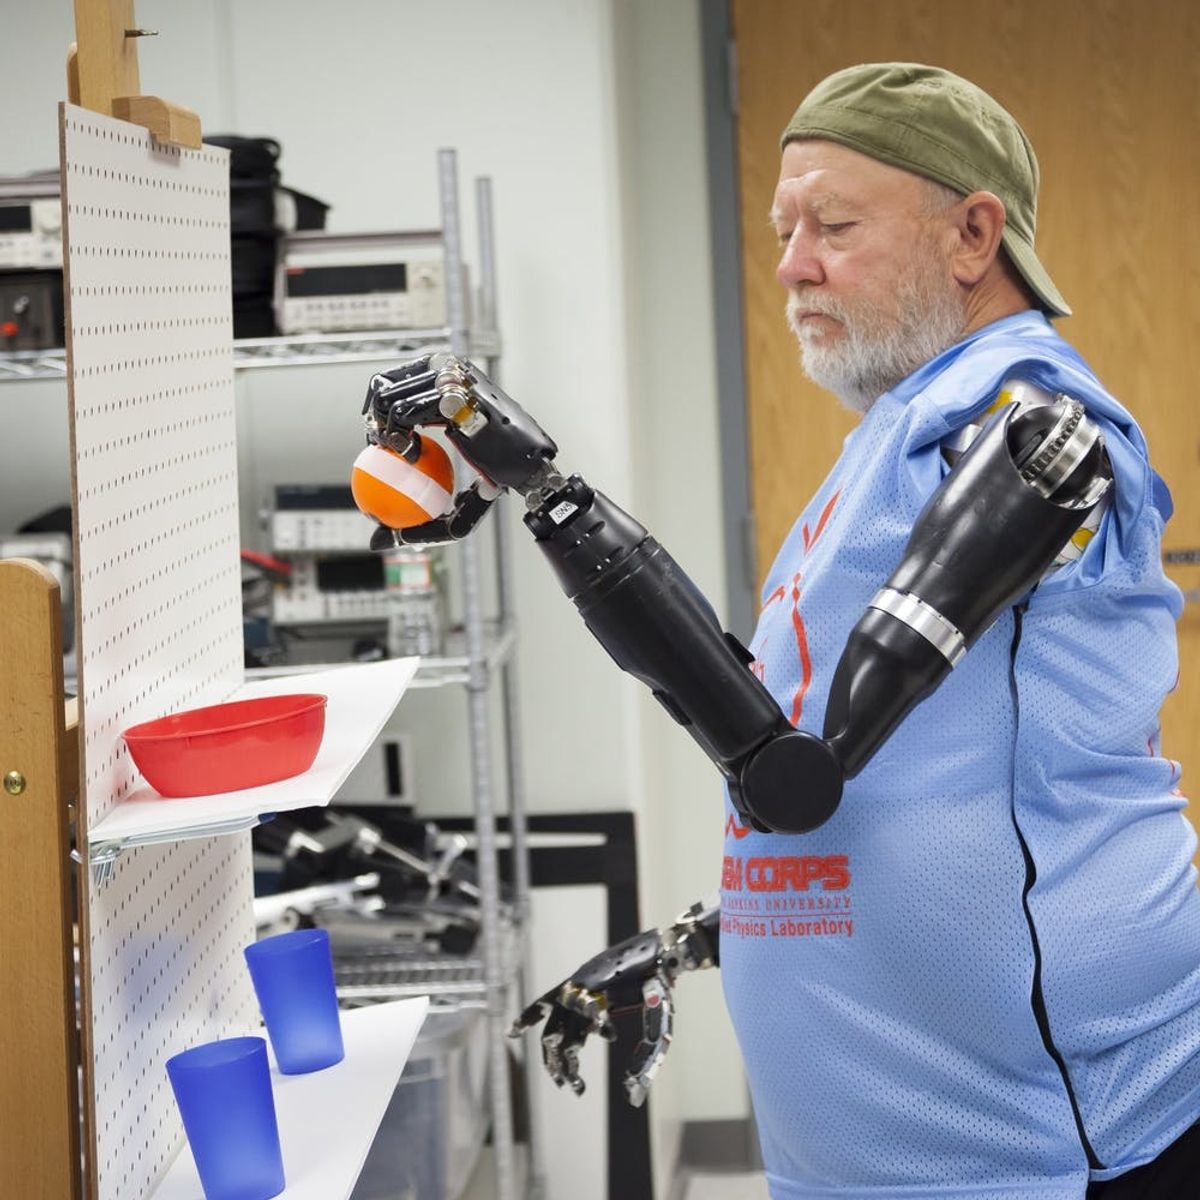 This Man Can Control His Mechanical Arms With His Mind